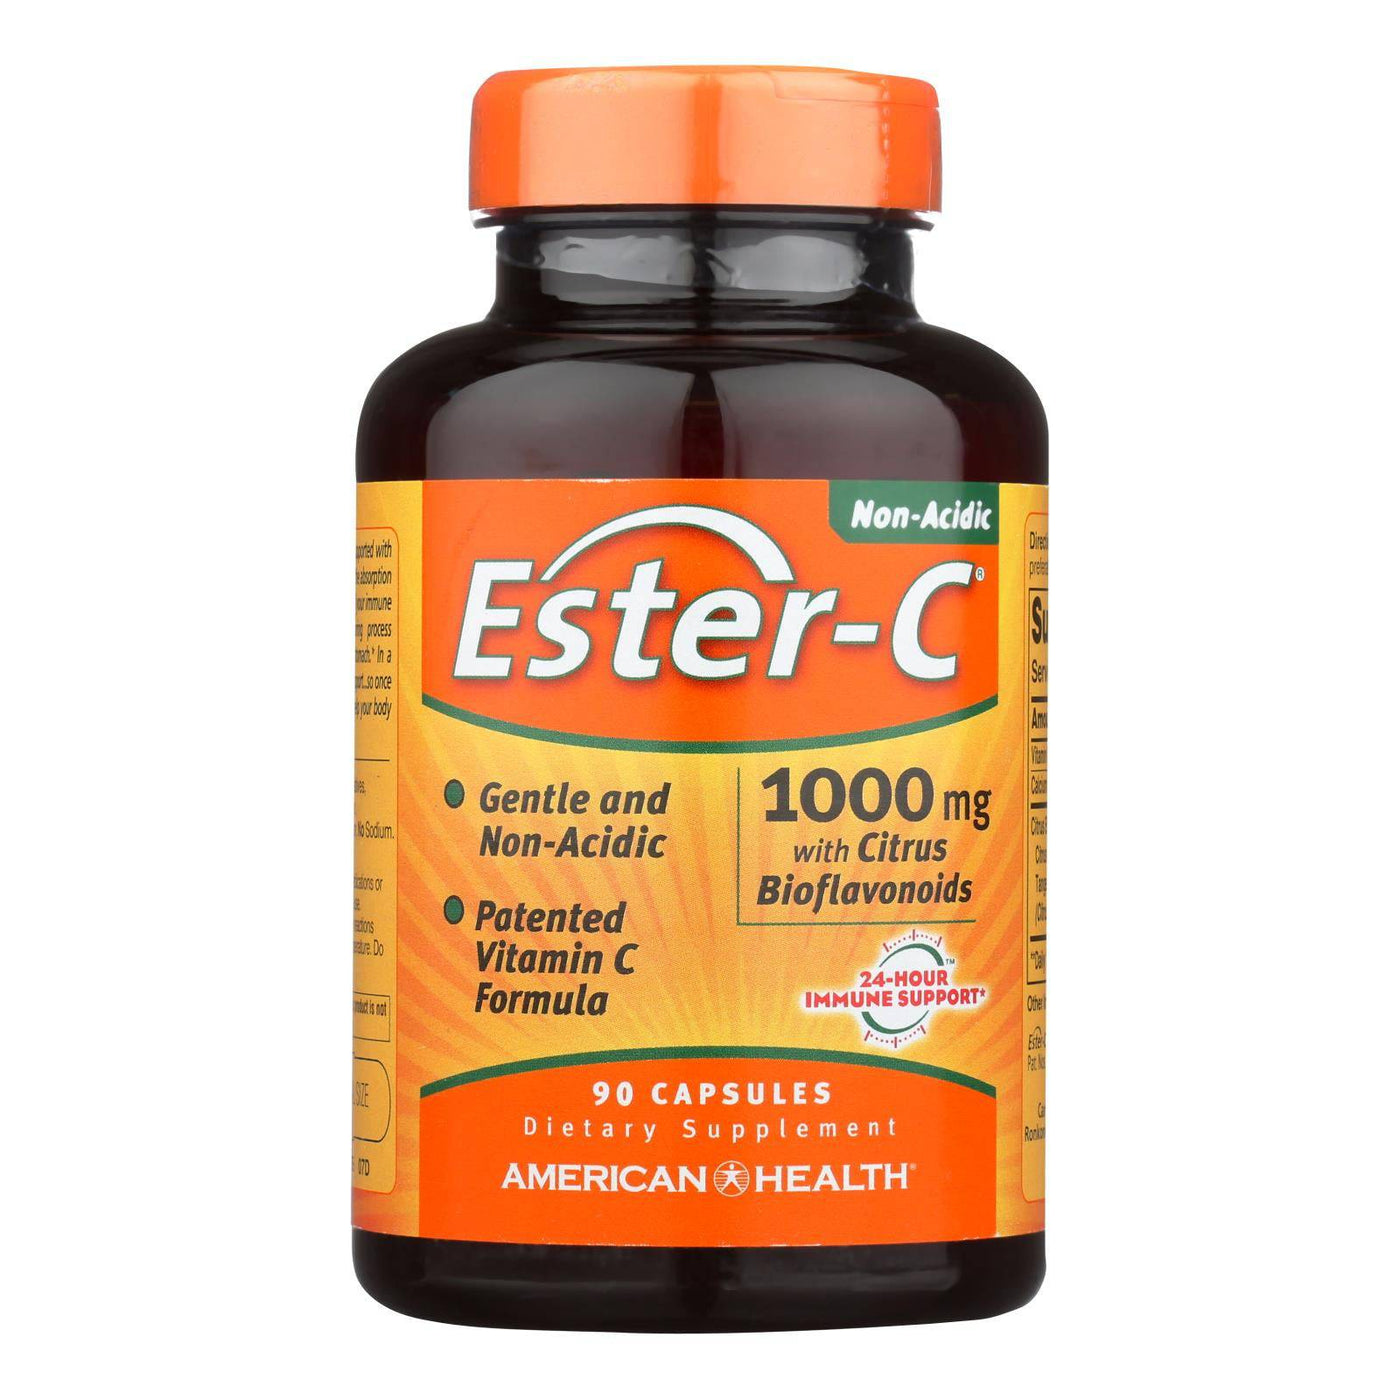 Buy American Health - Ester-c With Citrus Bioflavonoids - 1000 Mg - 90 Capsules  at OnlyNaturals.us